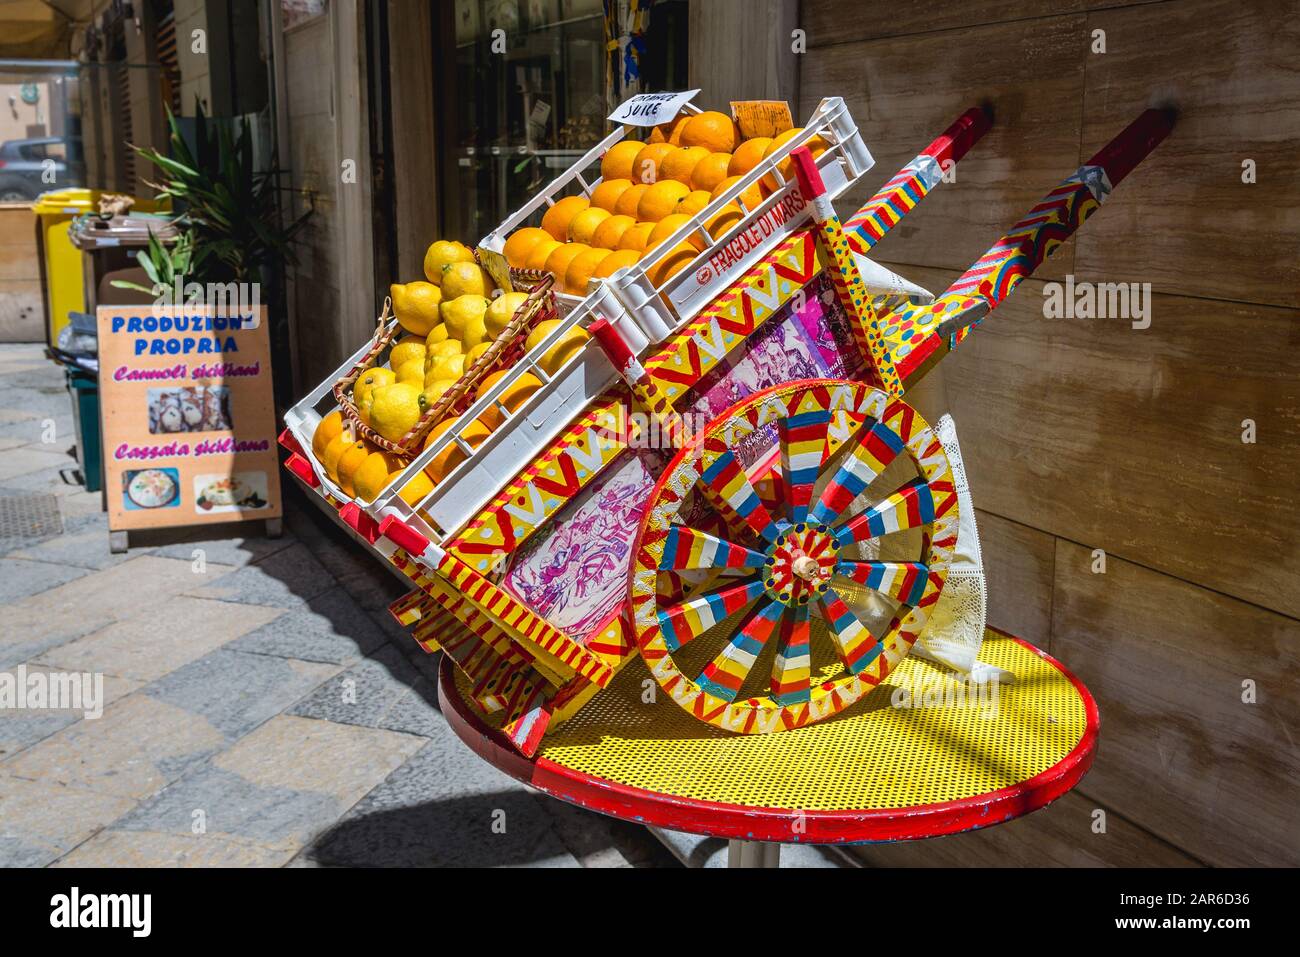 Carretto siciliano - traditional Sicilian cart in front of a grocery store in Trapani city on the west coast of Sicily in Italy Stock Photo